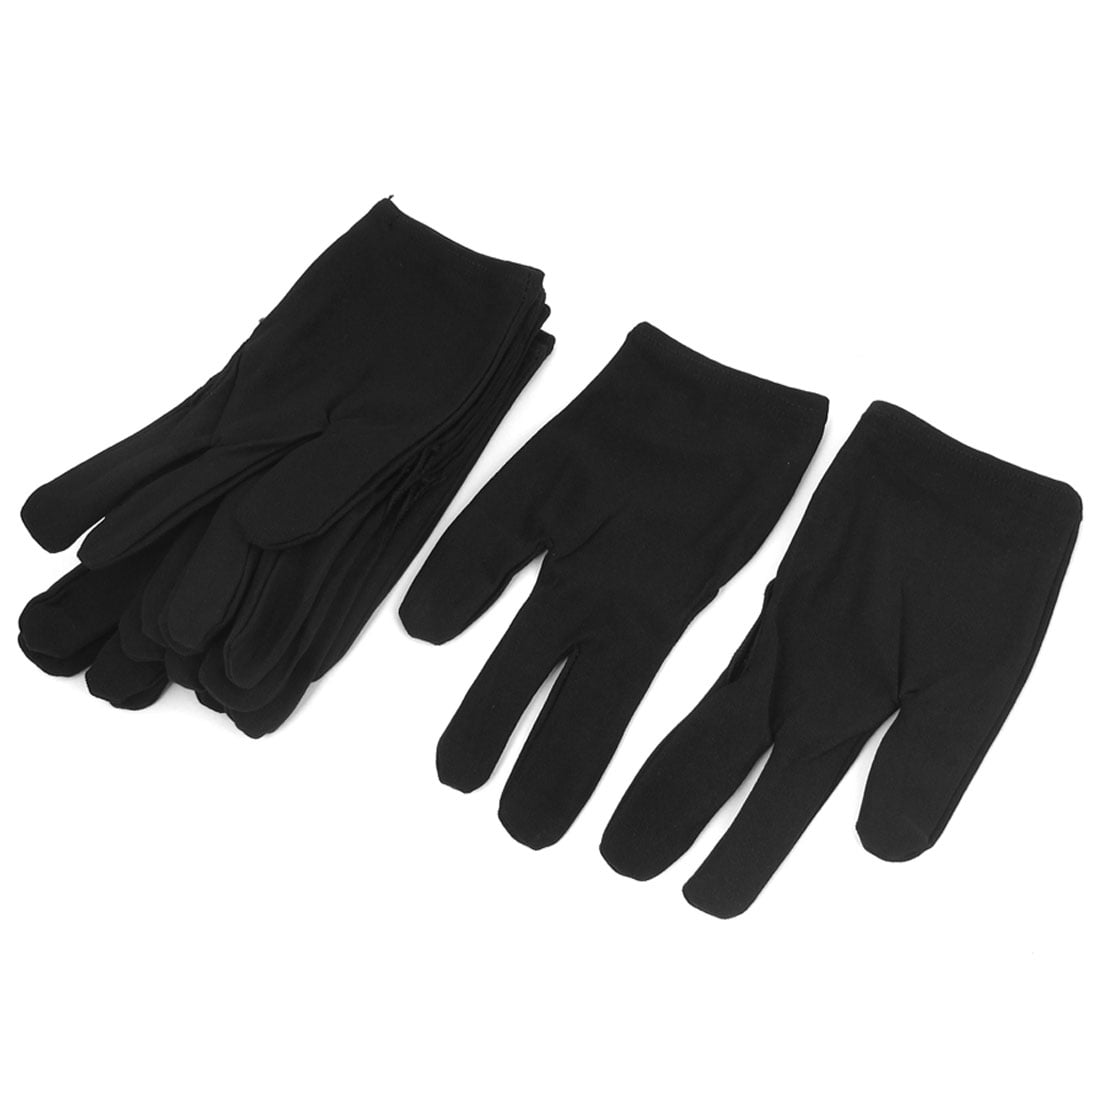 Pack of 12 Pieces Black T&R sports Billiard Glove 3 Fingers Show Pool Cue Gloves 